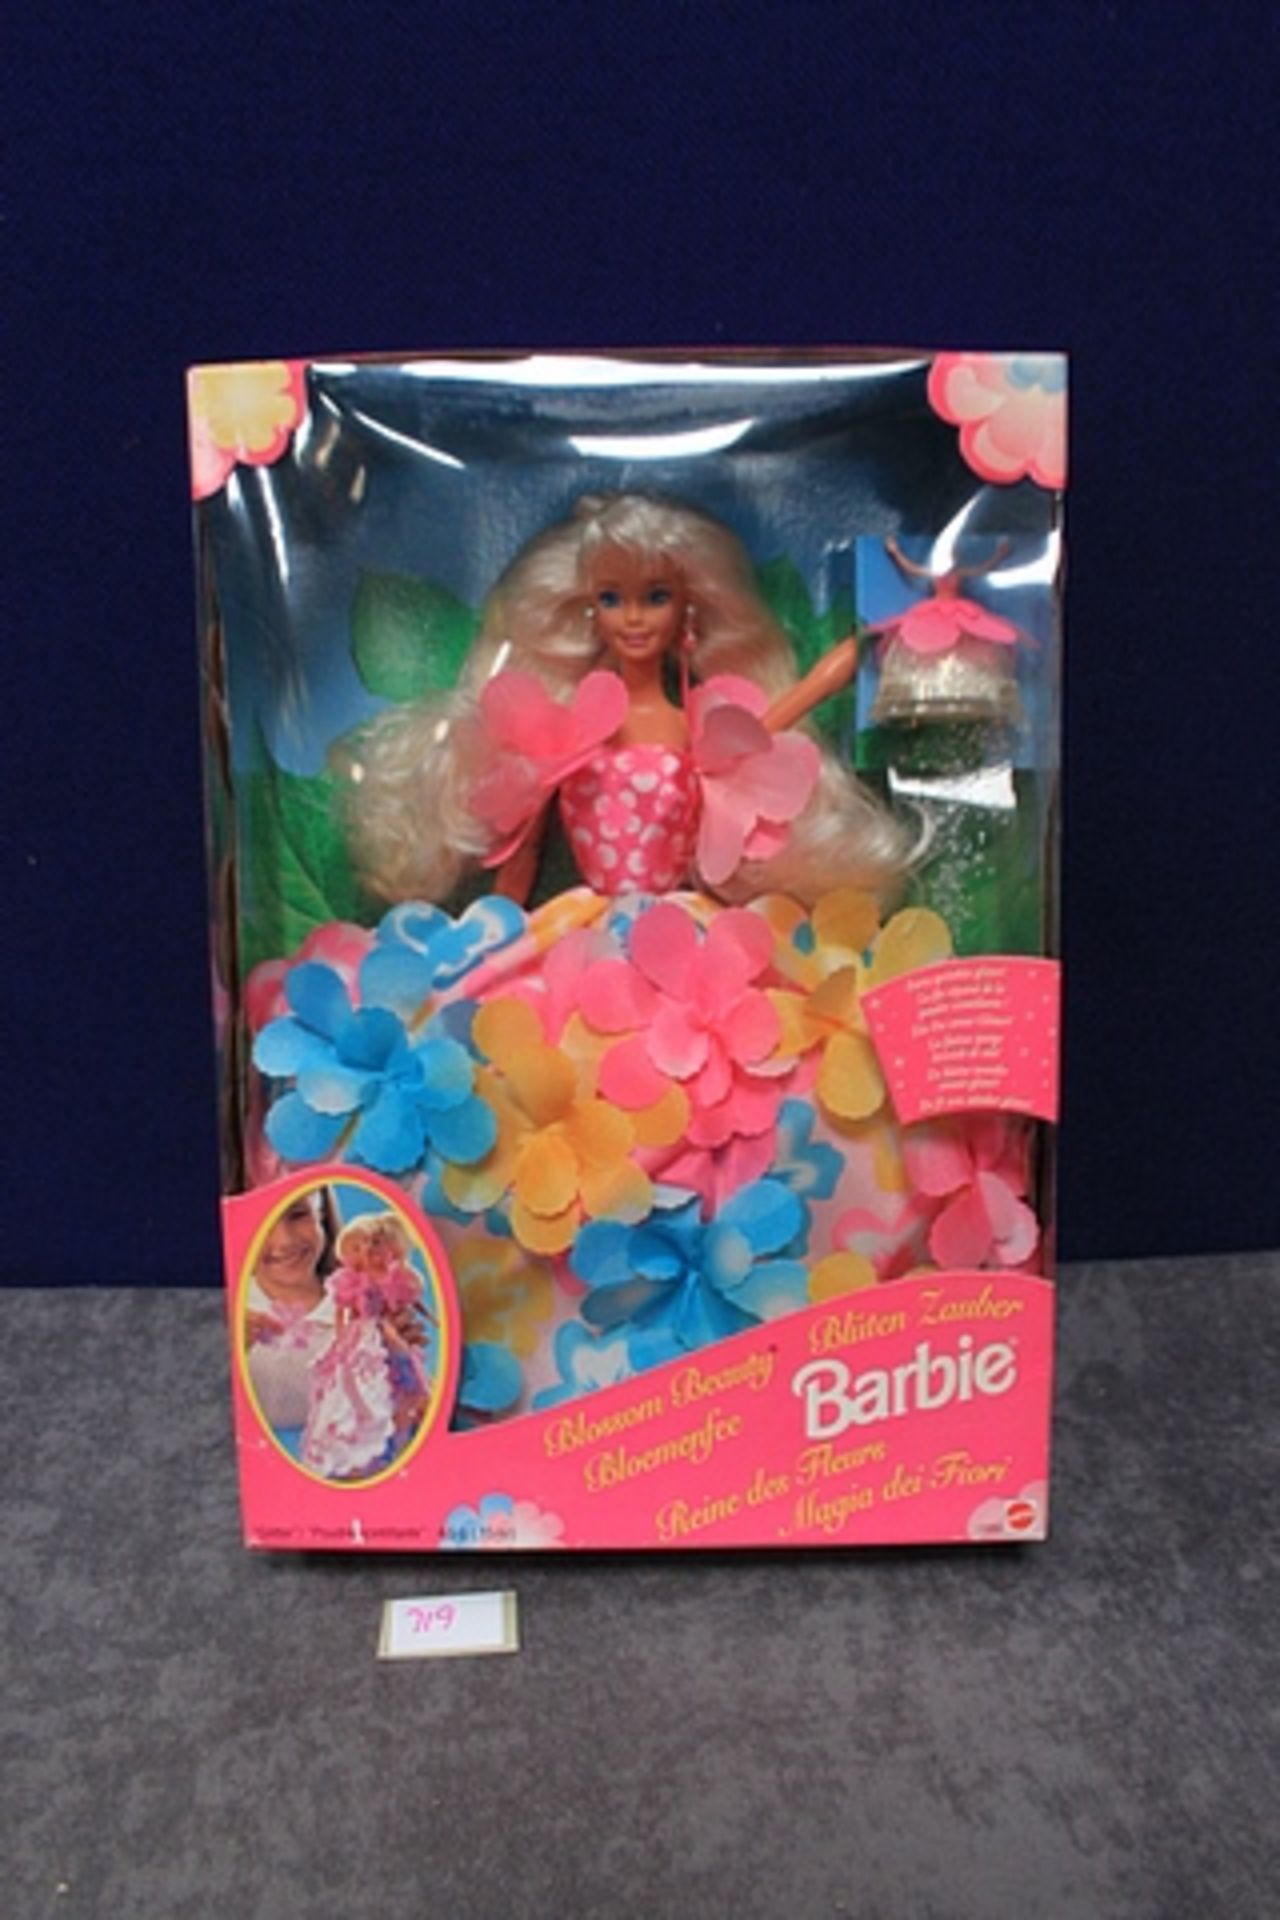 Mattel # 17032 Blossom Beauty Barbie In Box - Image 2 of 2